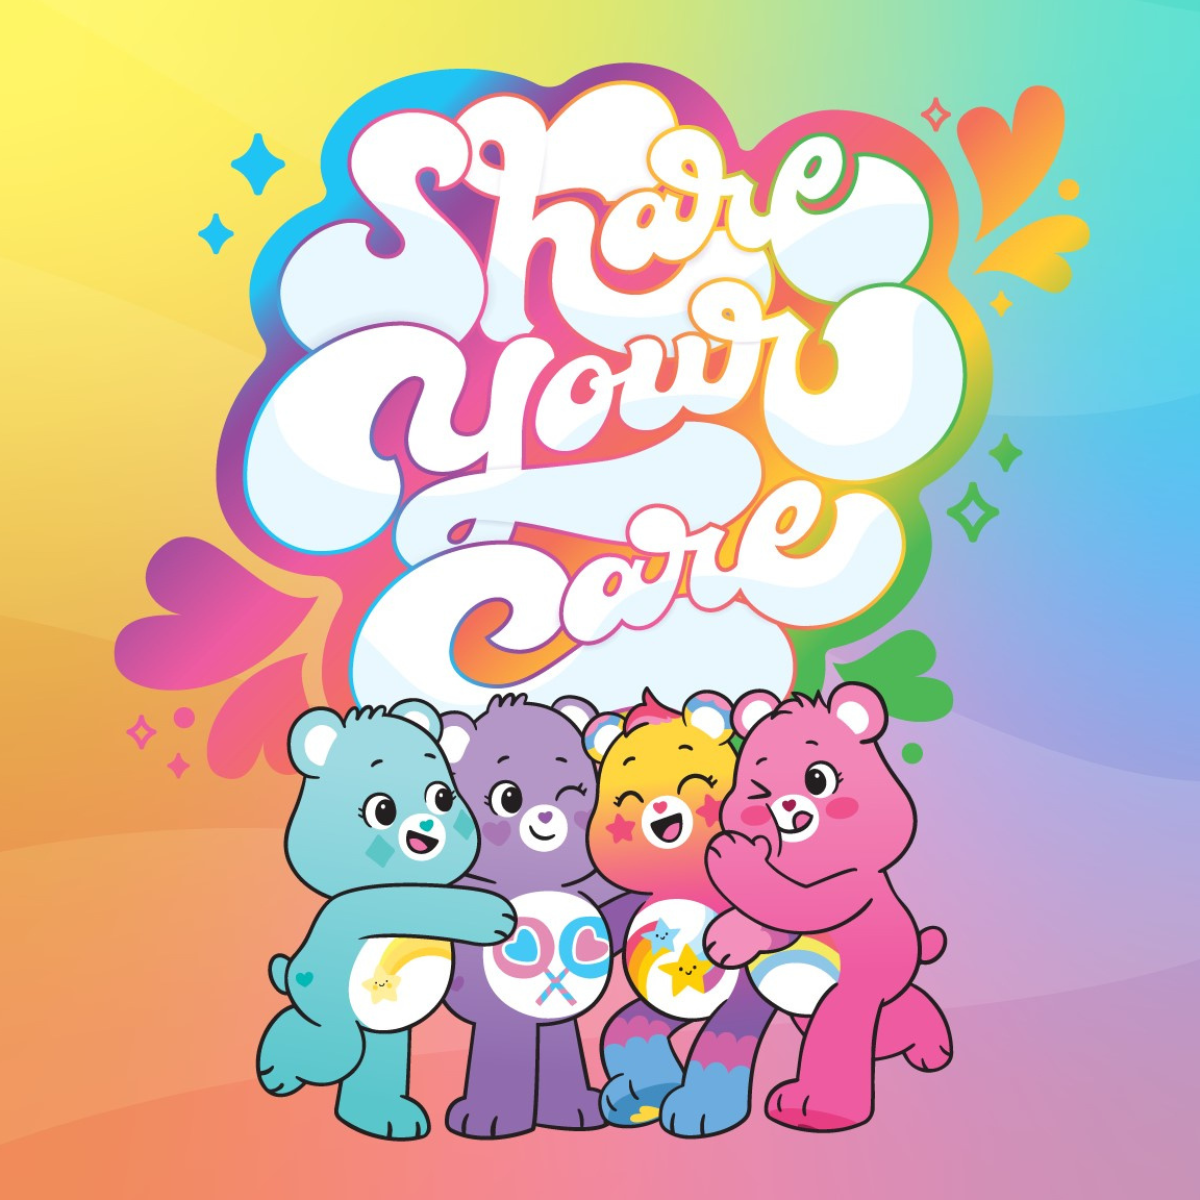 Happy Share Your Care day with Care Bears